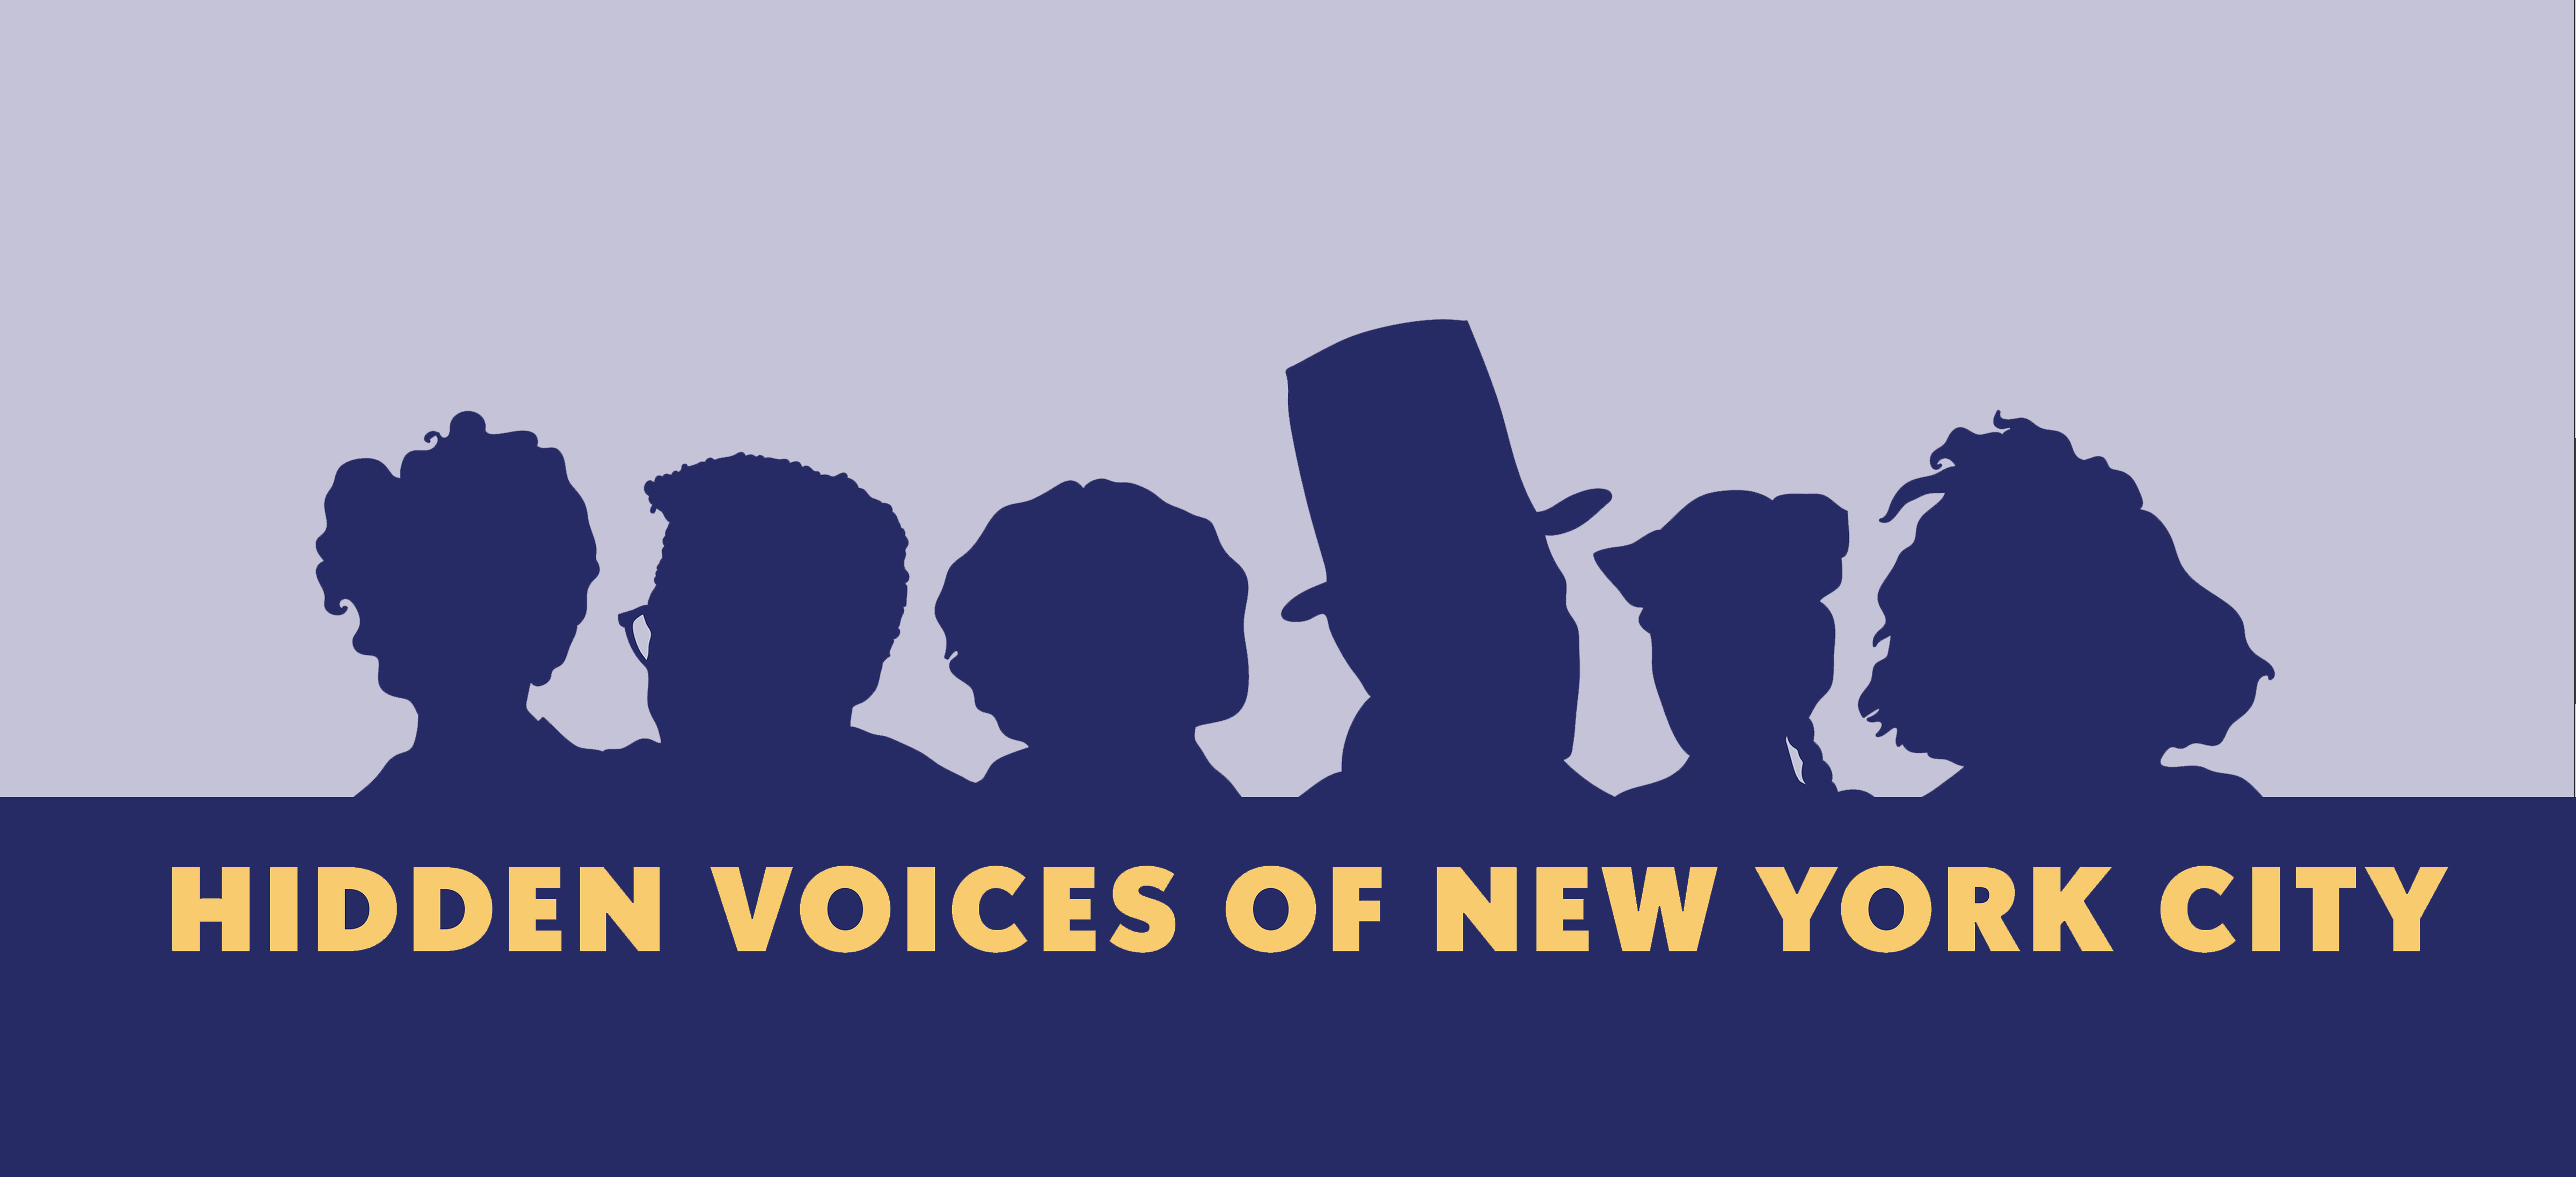 A banner including six silhouette images of the figures featured in the Hidden Voices of New York City virtual workshop series, from left to right: Antonia Pantoja, Bayard Rustin, Elsie Richardson, David Ruggles, Wong Chin Foo, and Sylvia Rivera